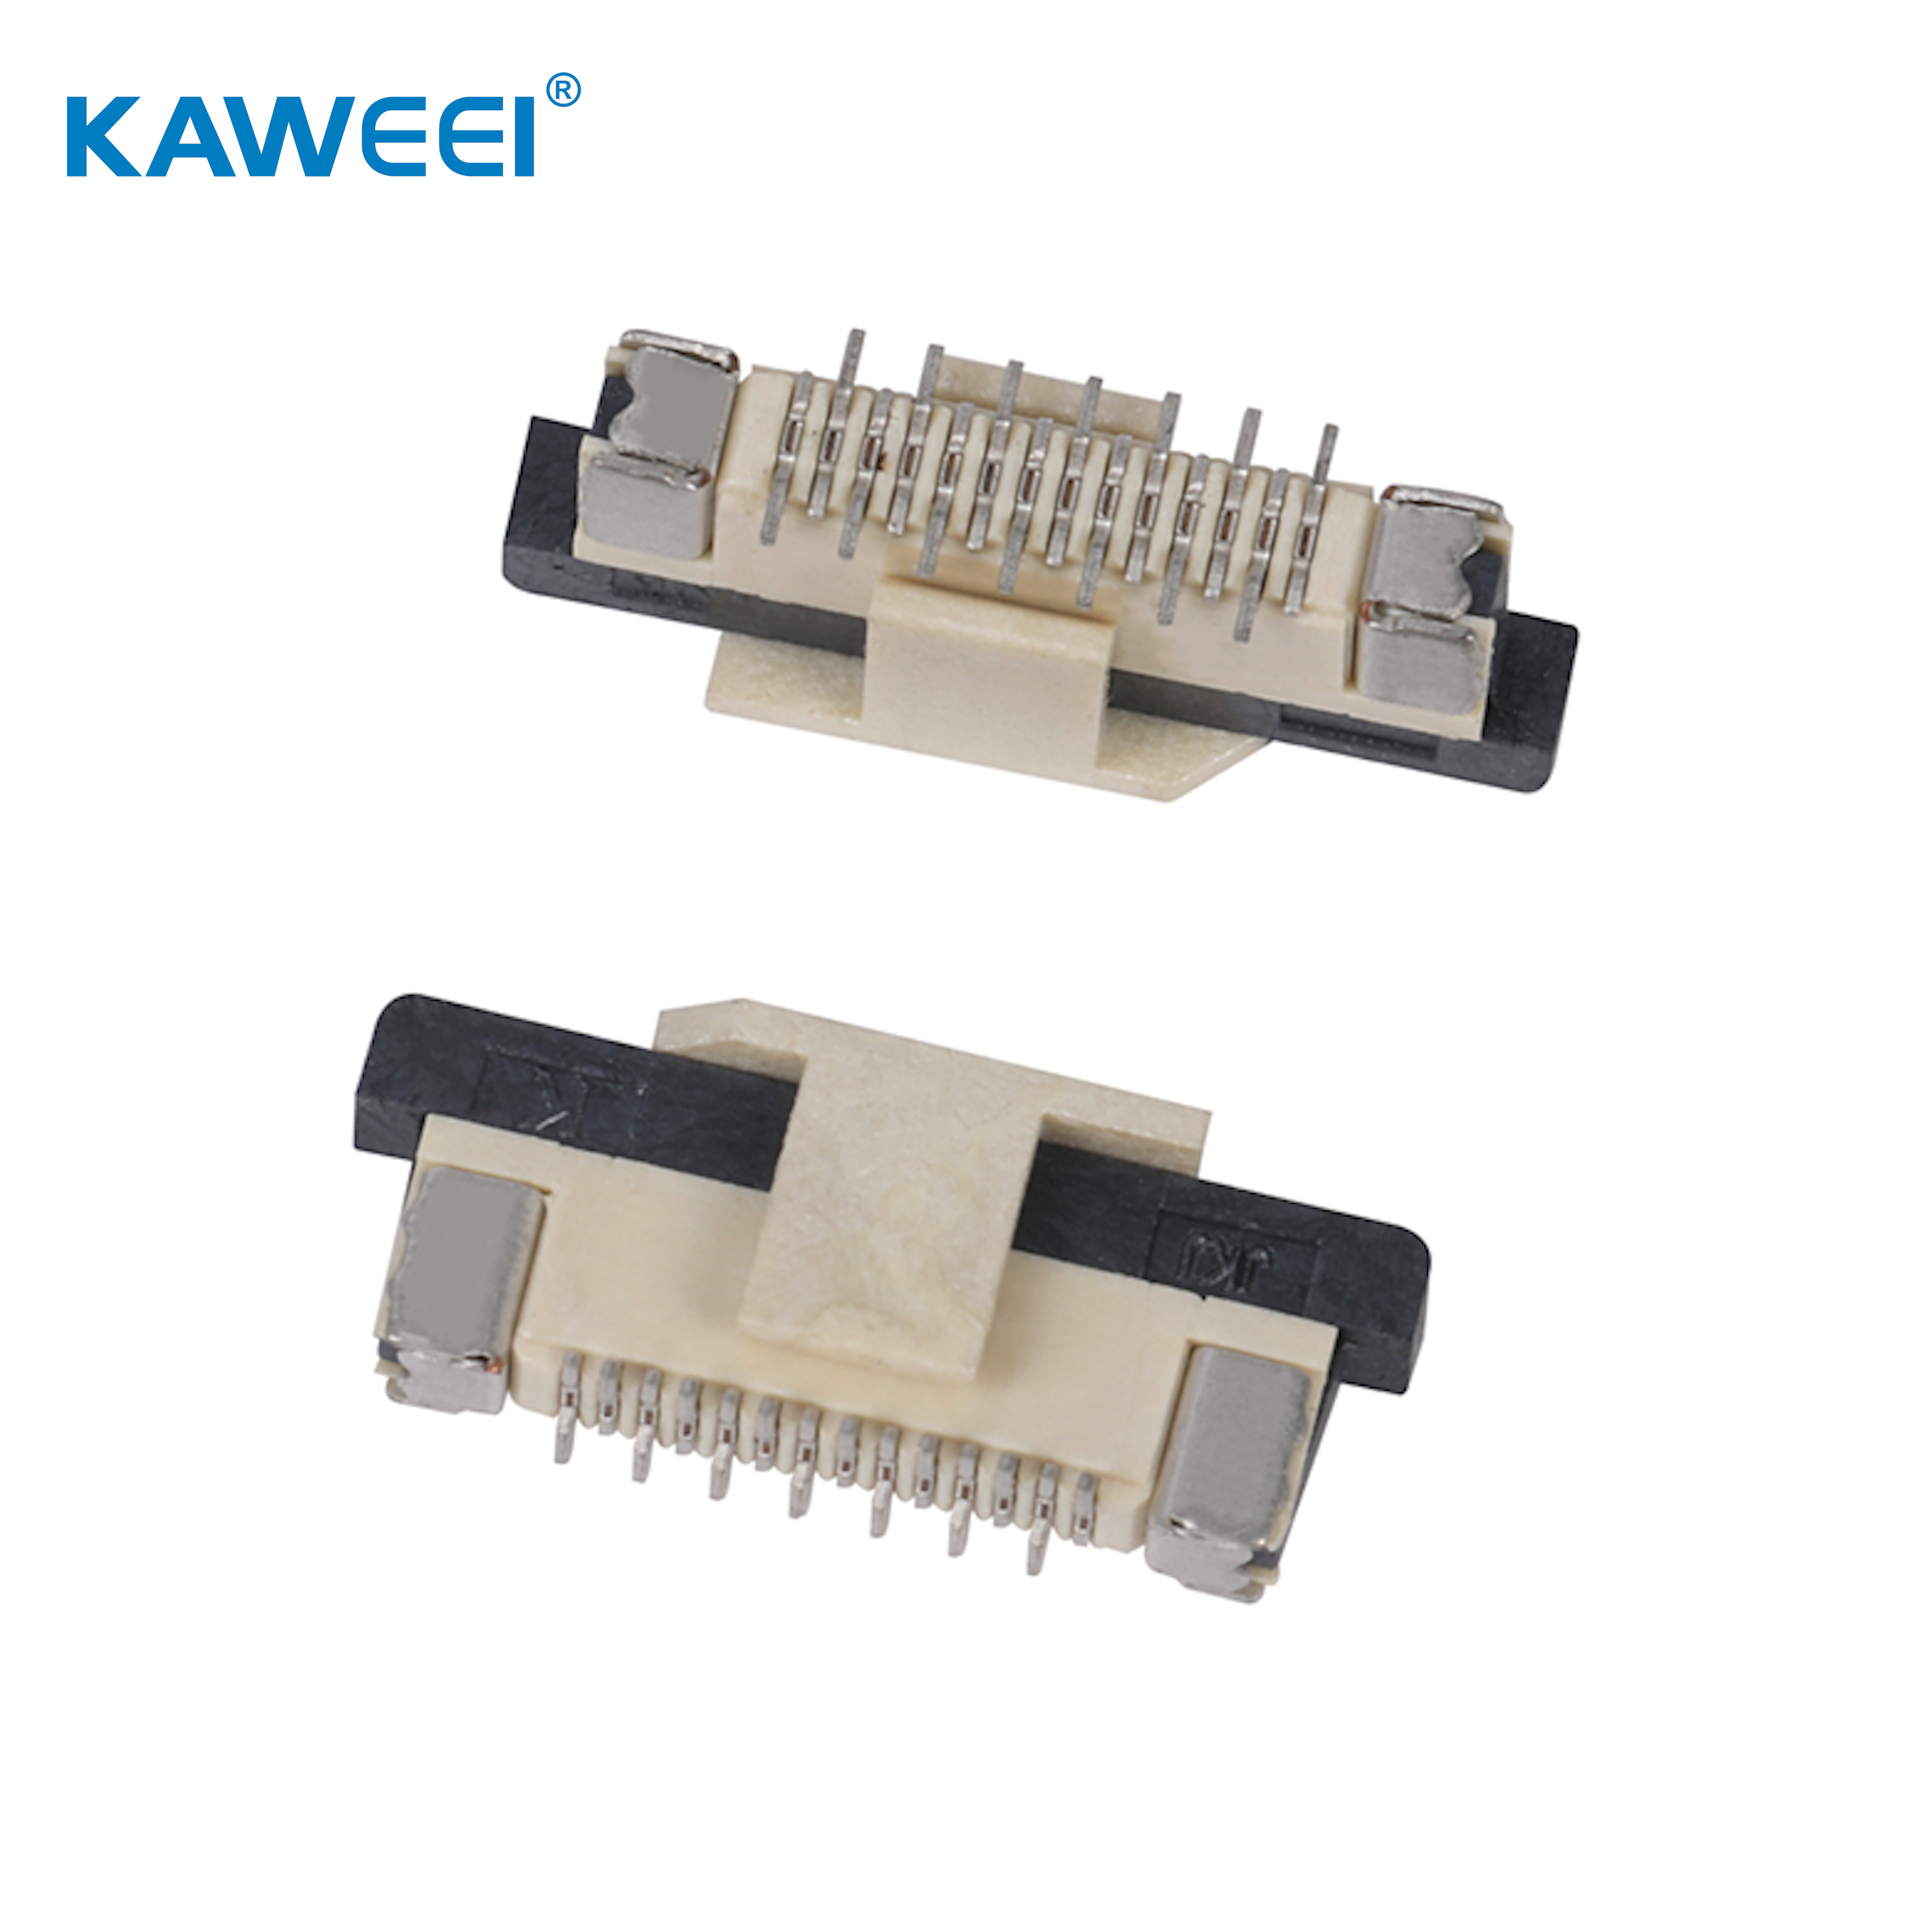 0.5mm pitch ffc fpc connector SMT type